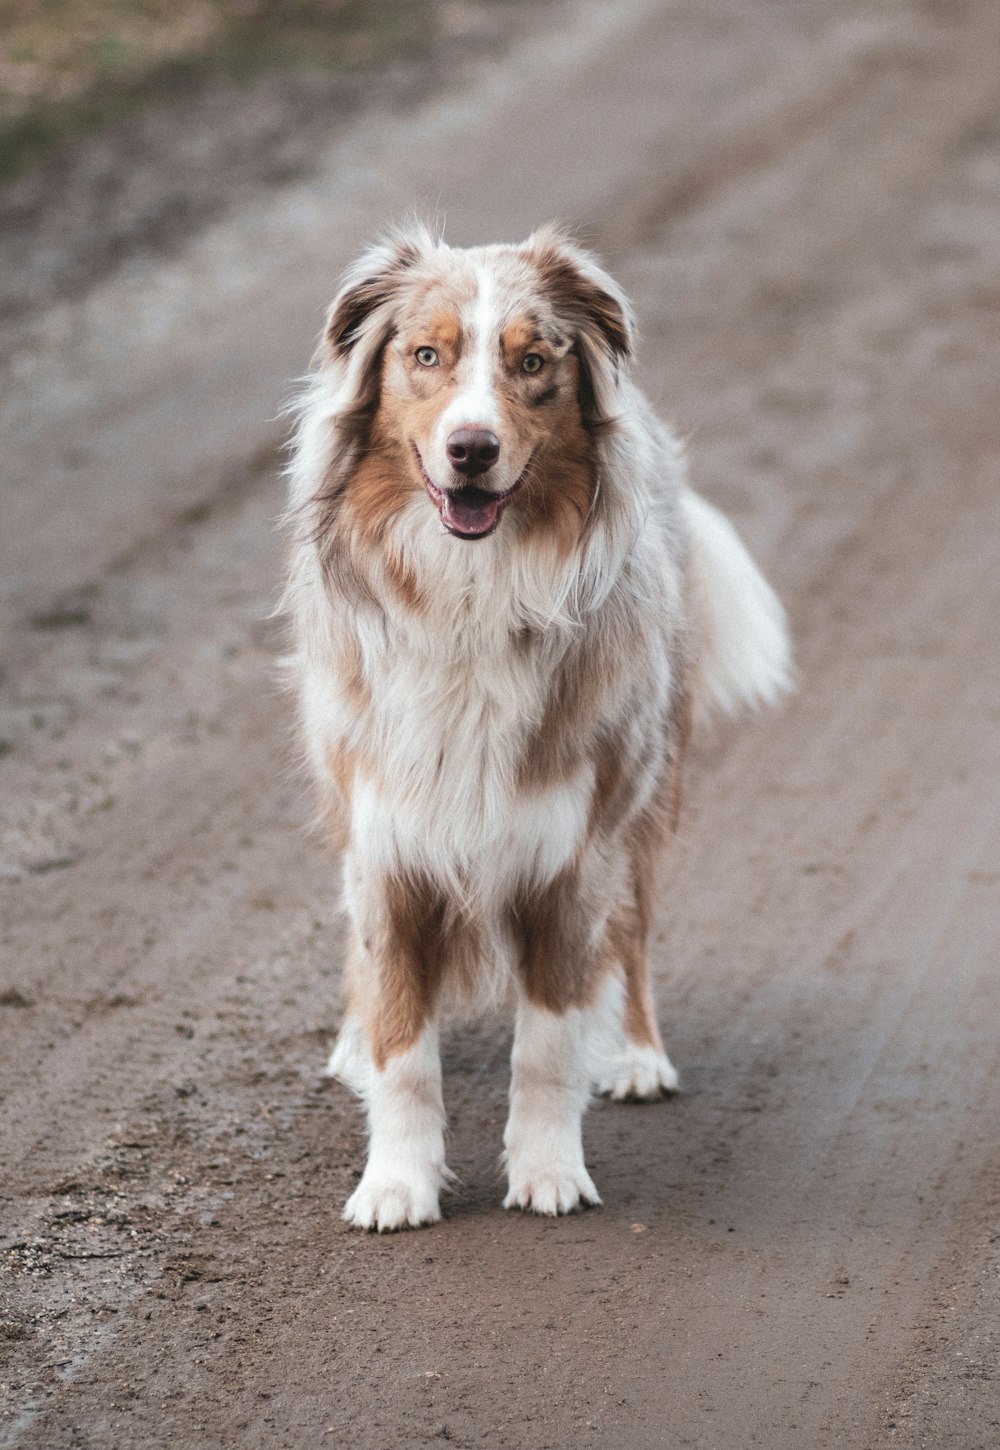 white and brown dog standing on road